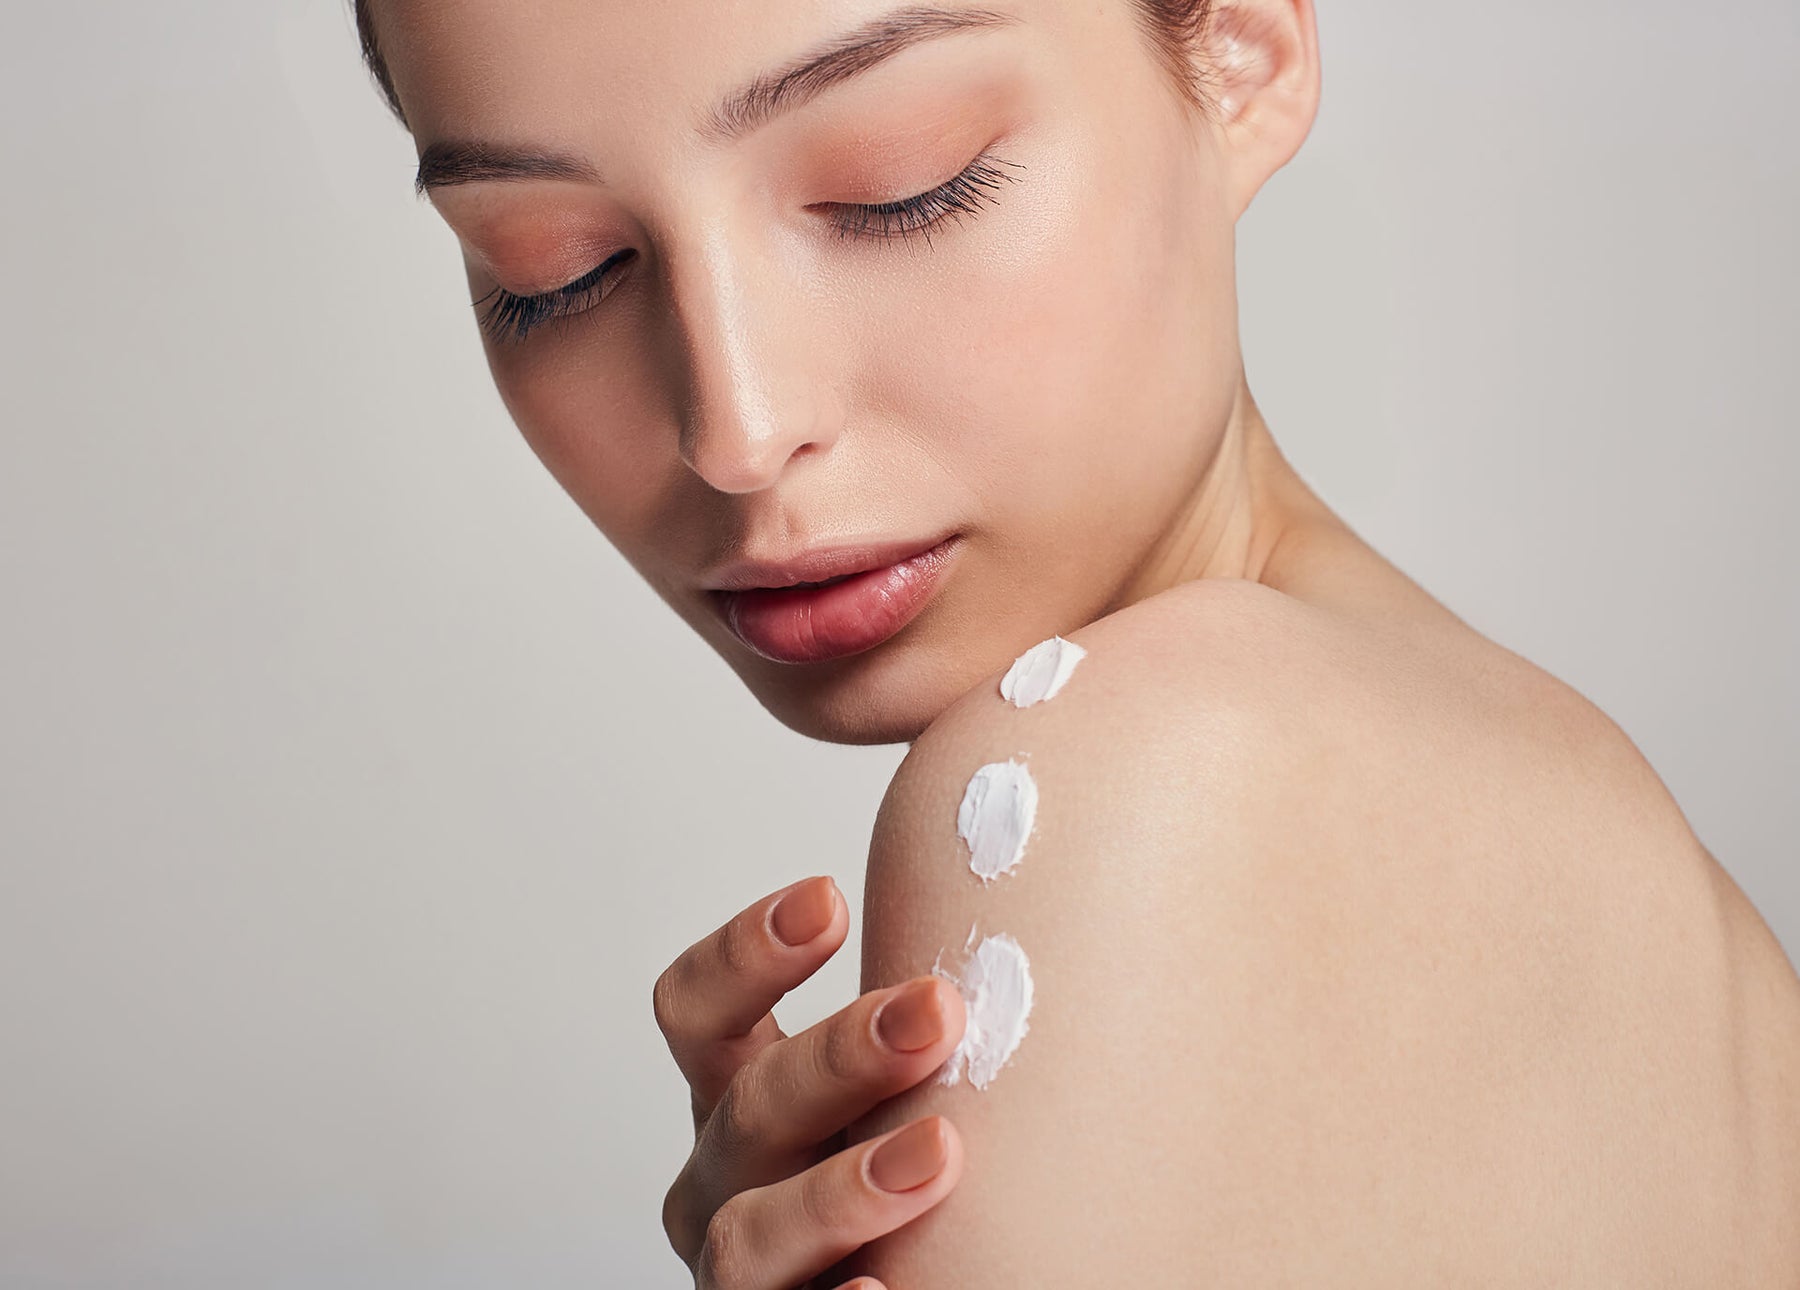 Dry Skin: Do's and Don'ts